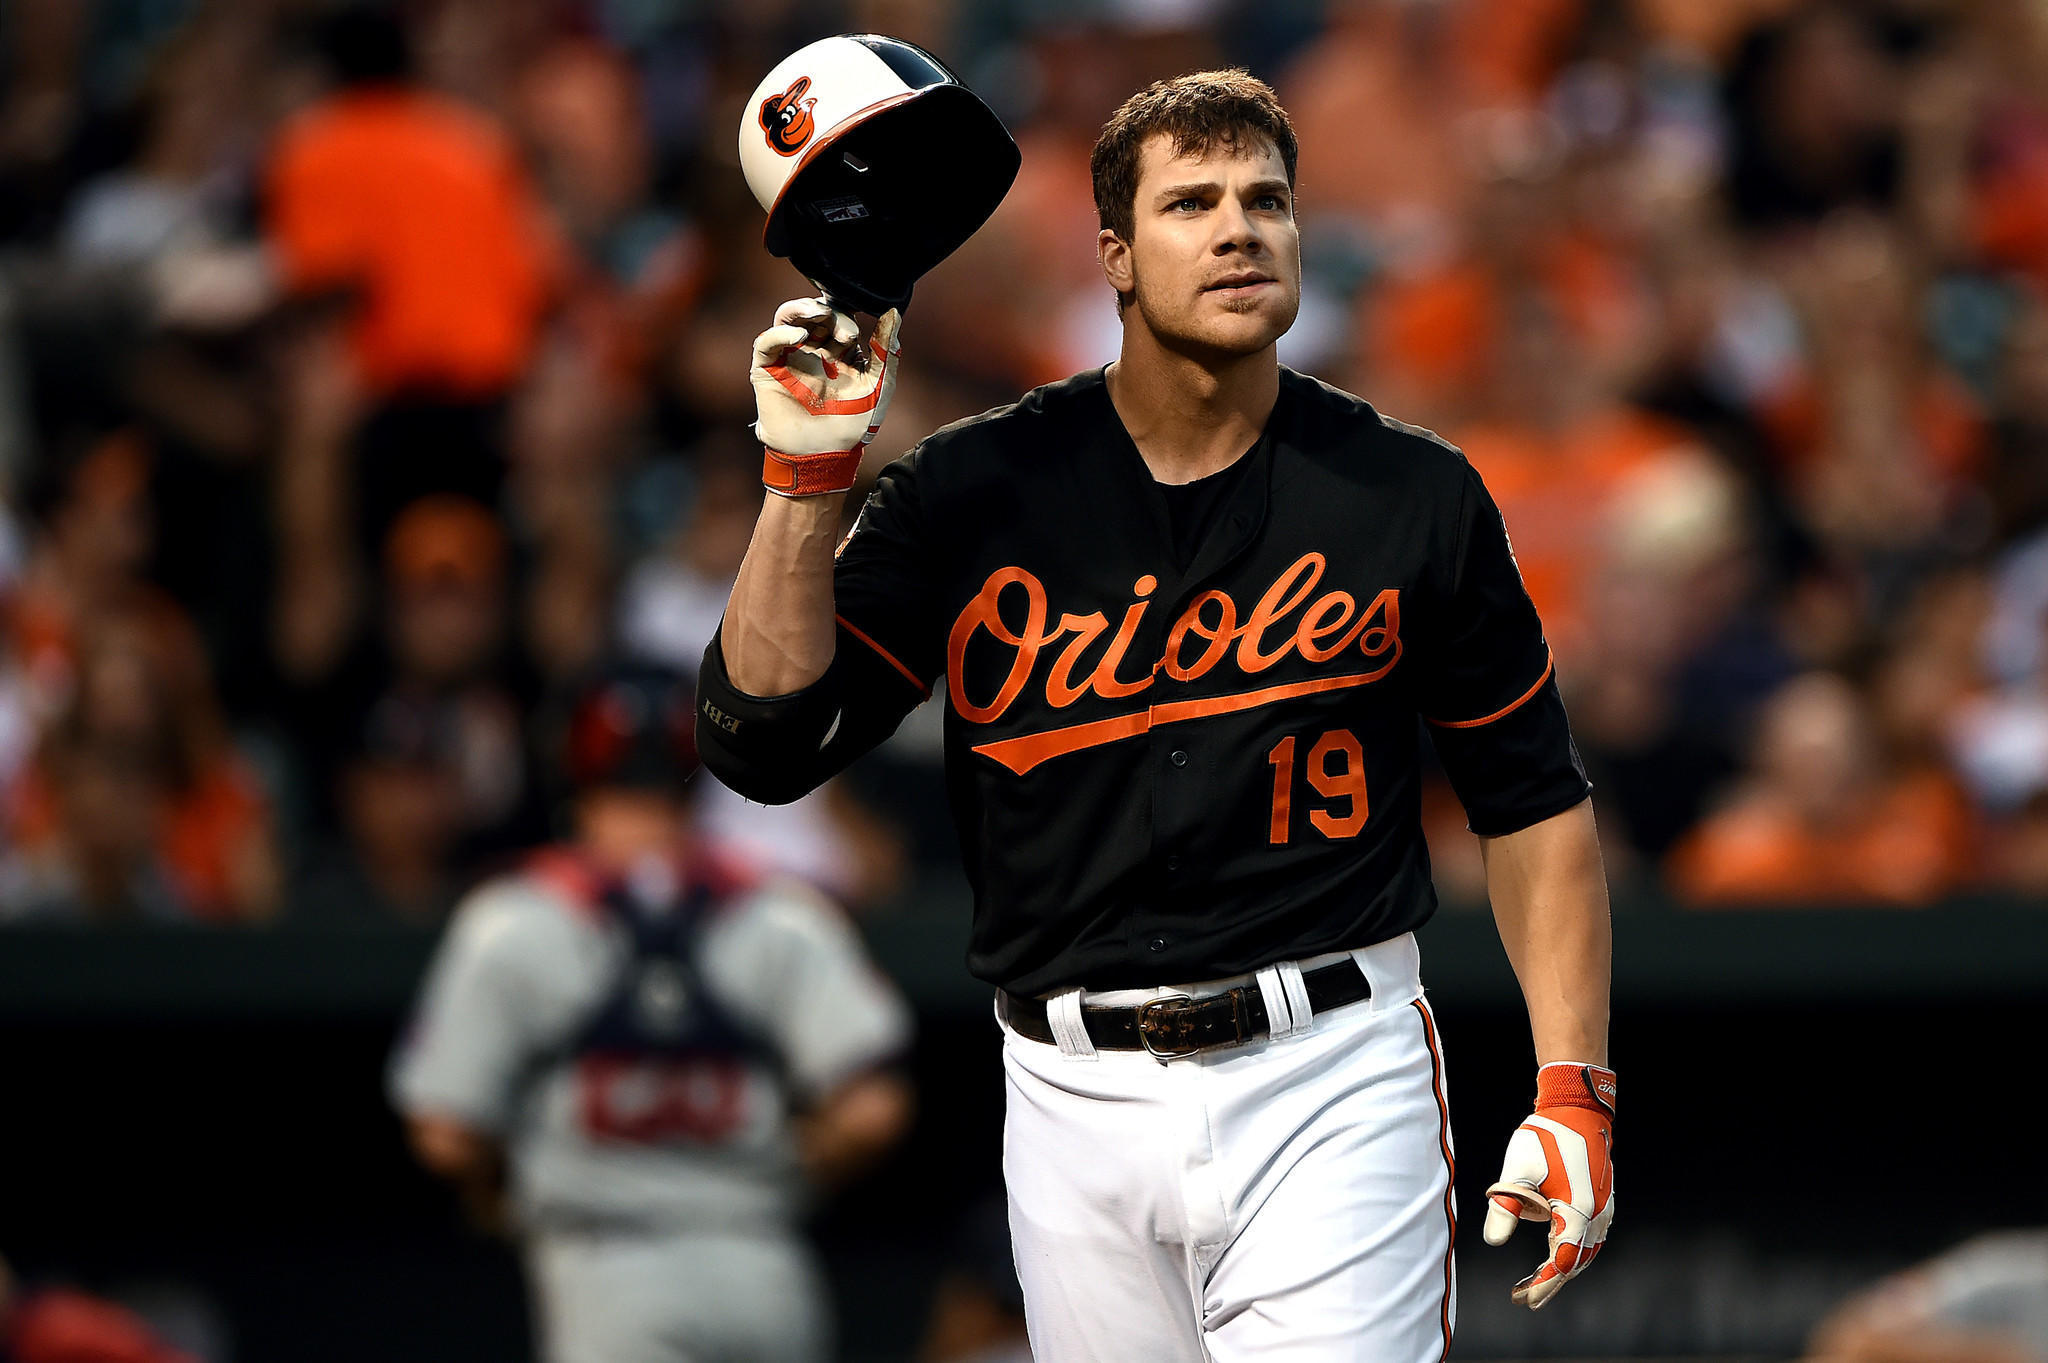 Chris Davis is healthy and ready to bounce back from painful 2016